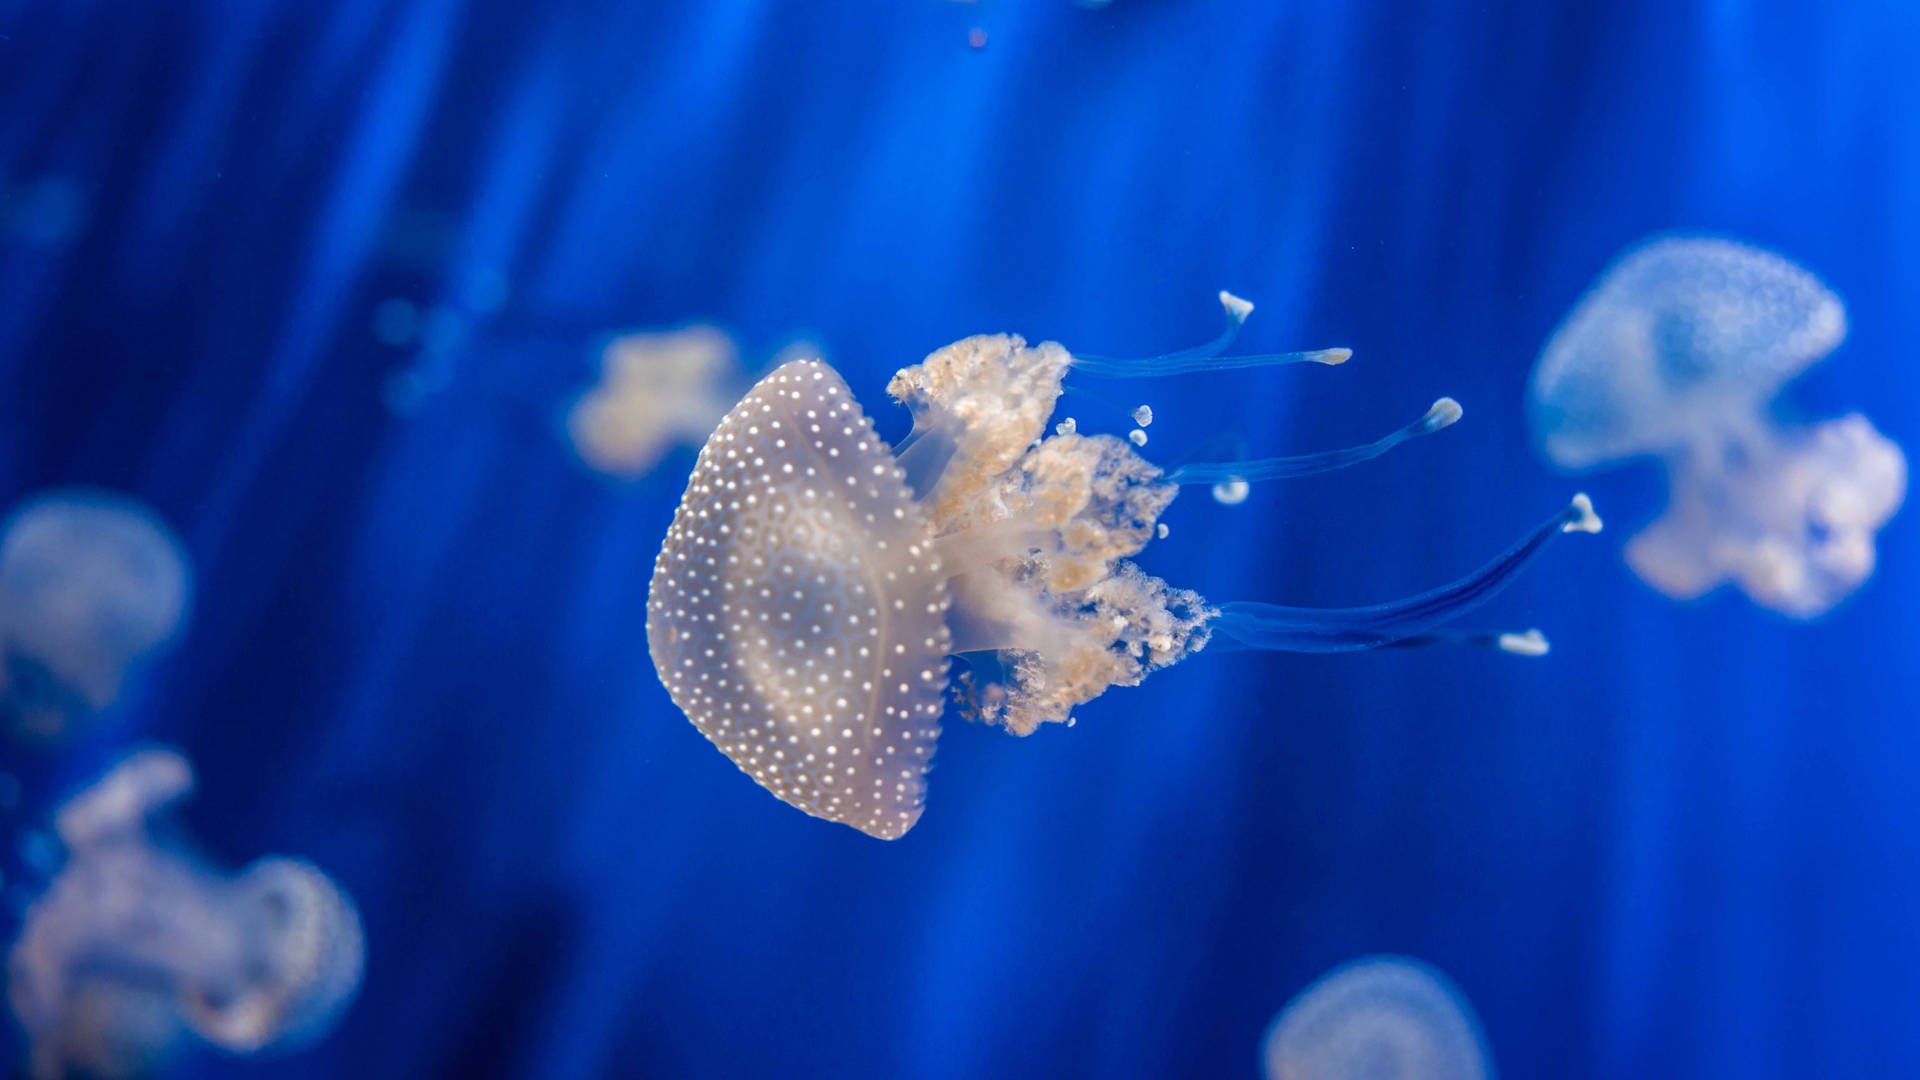 5k Hd White-spotted Jellyfish Wallpaper